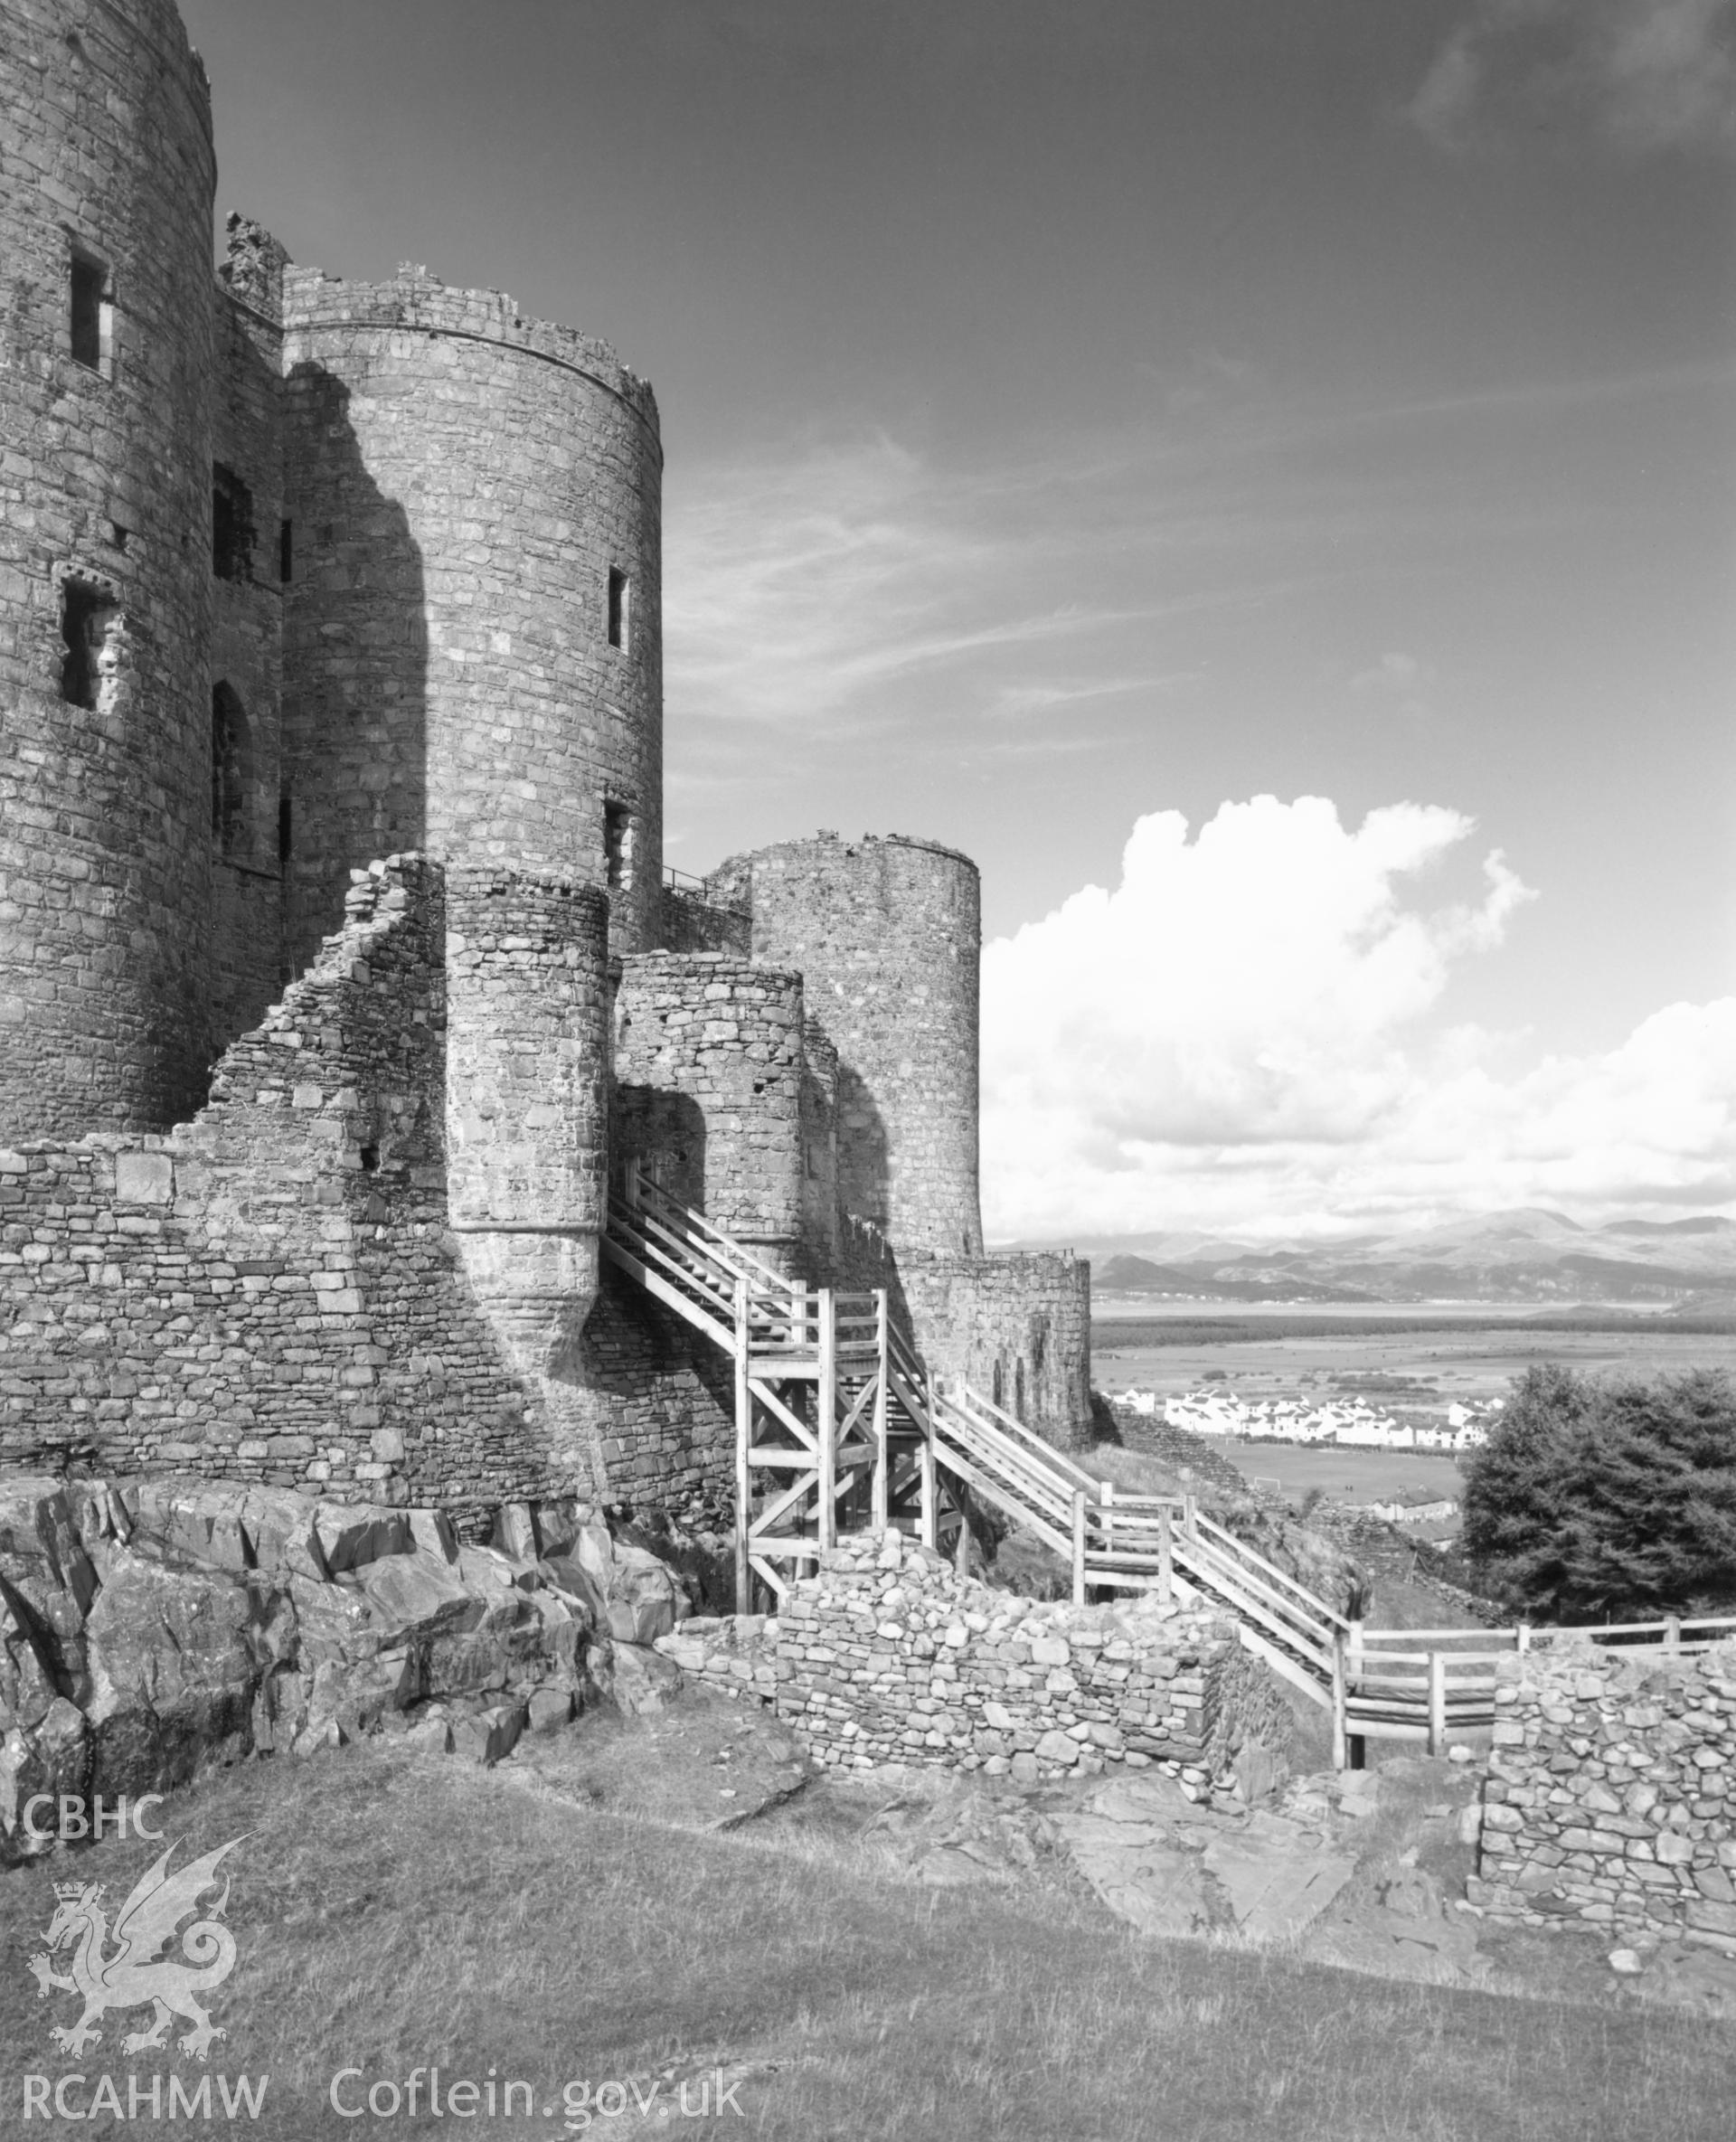 View of the main entrance of Harlech Castle, taken in 1982, from the Central Office of Information.